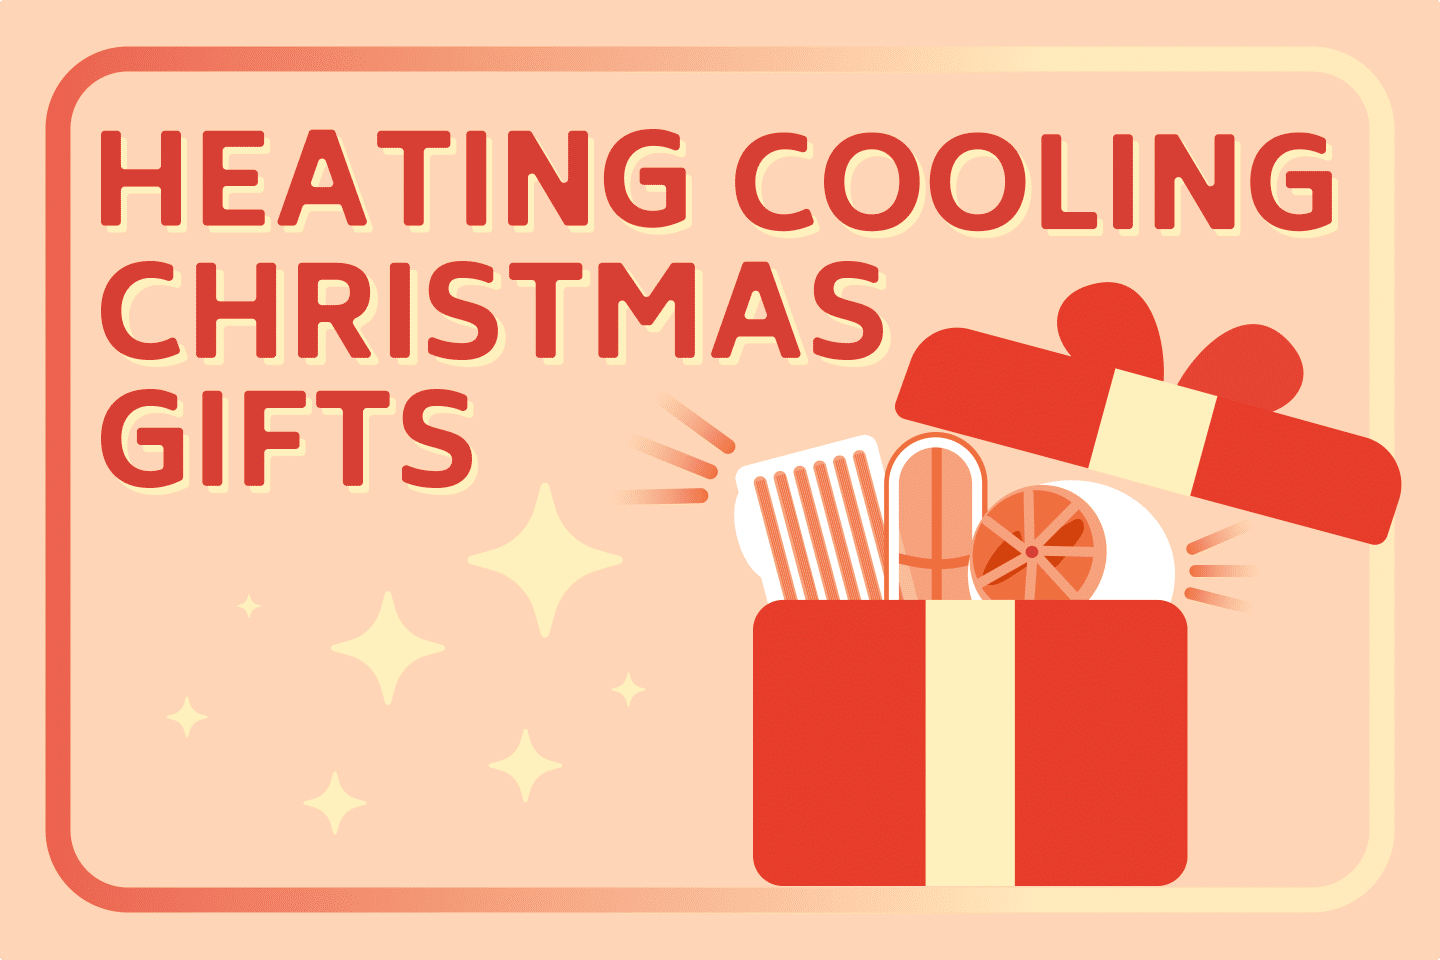 15 Heating & Cooling Christmas Gifts